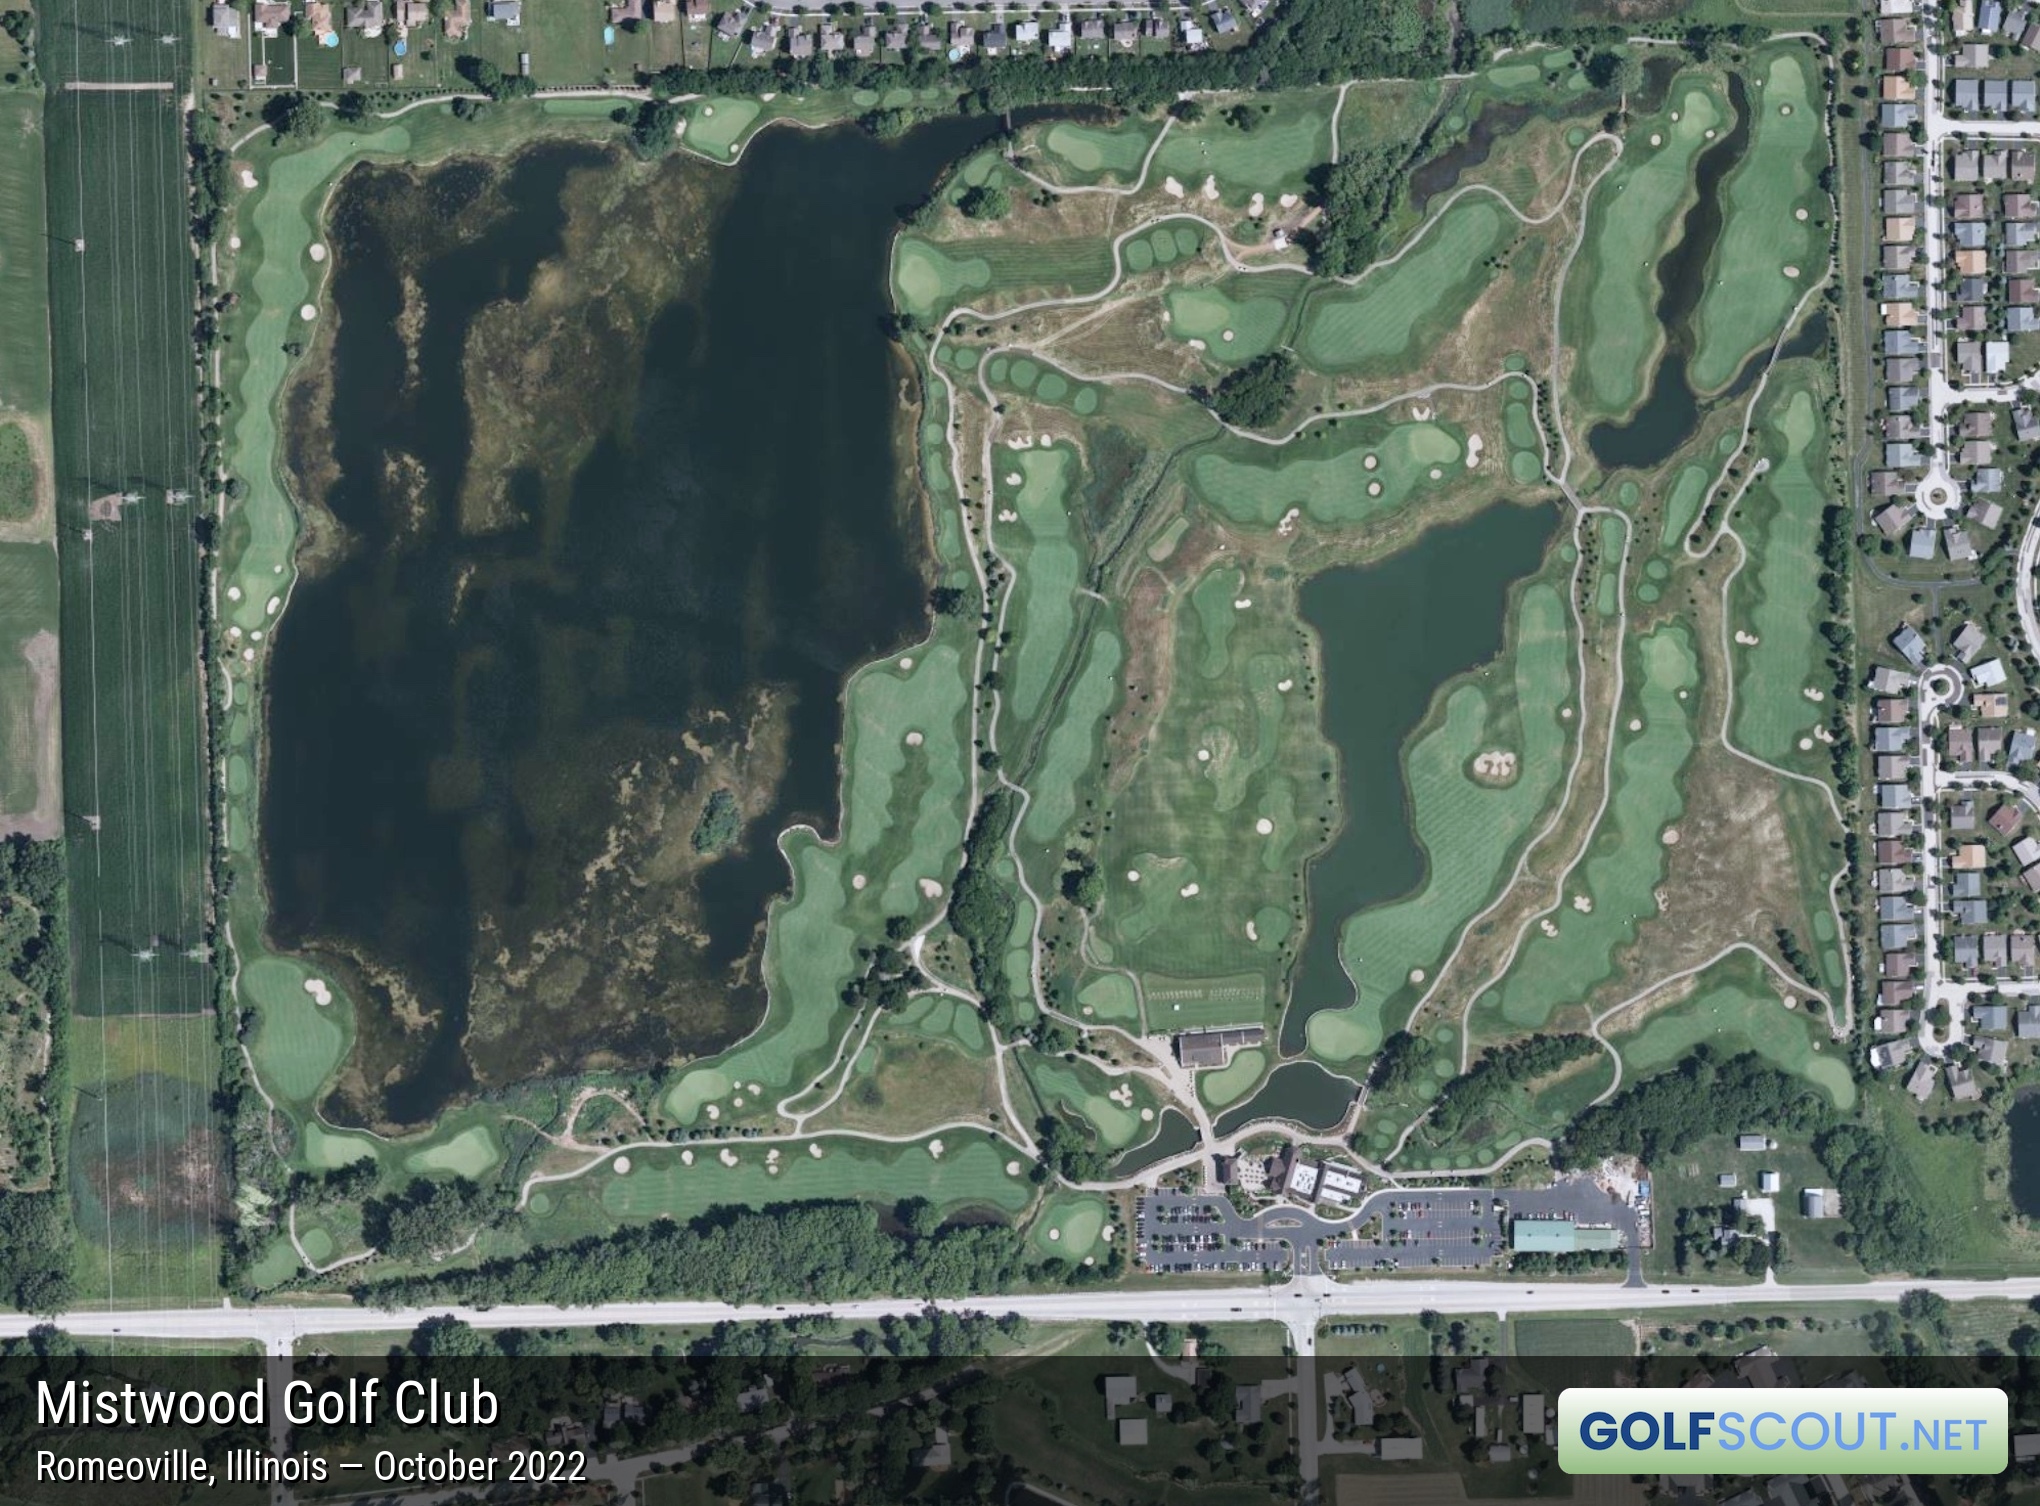 Aerial satellite imagery of Mistwood Golf Club in Romeoville, Illinois. The large body of water here is the 65-acre pond known as Loch St. James.